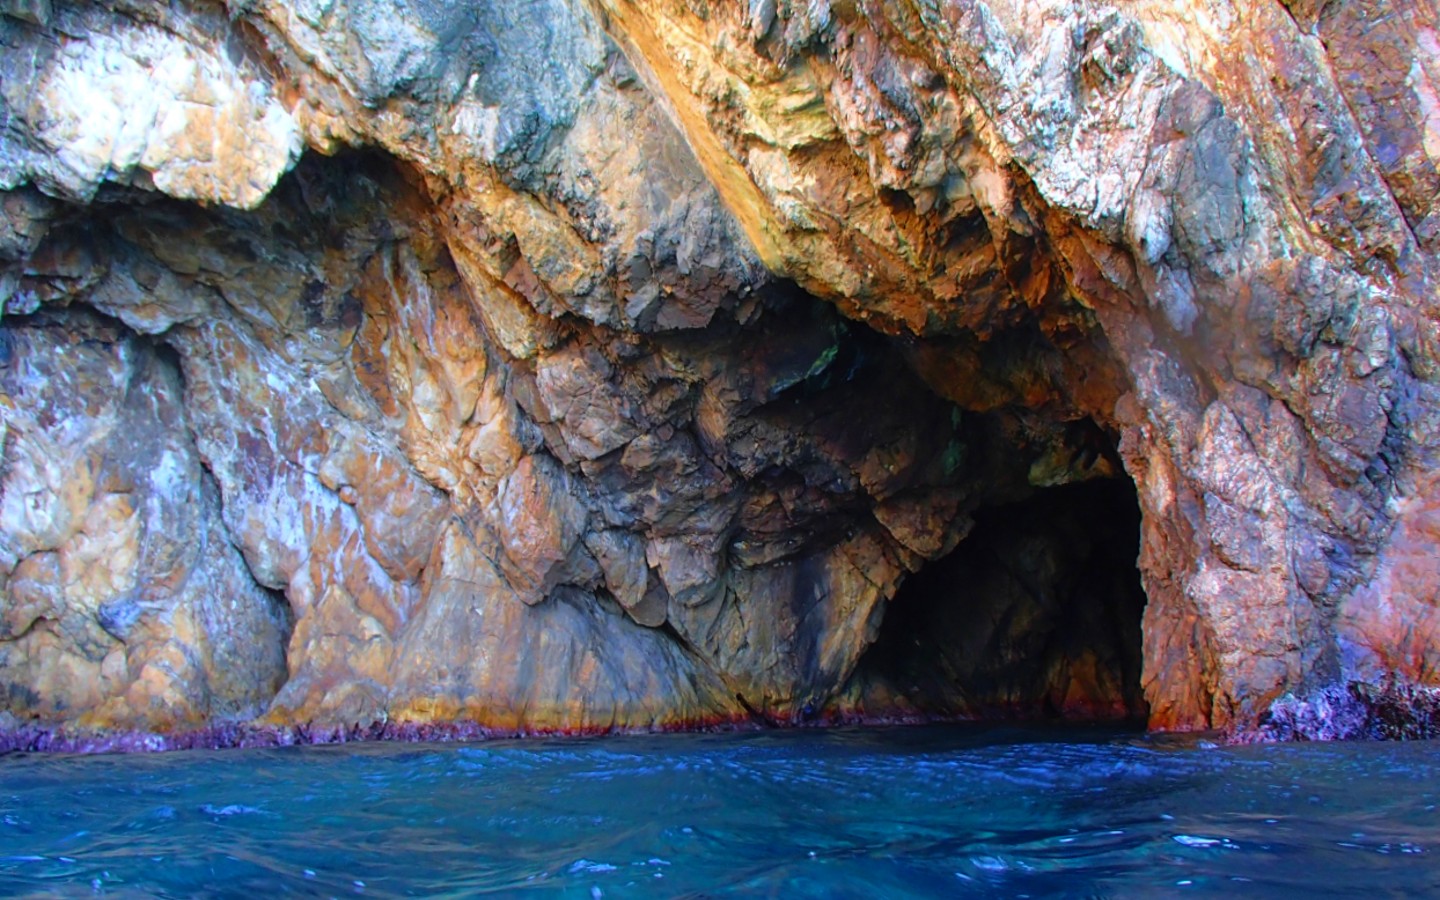 Norman Island in BVI, said to inspire 'Treasure Island,' offers caves and snorkeling in its waters.